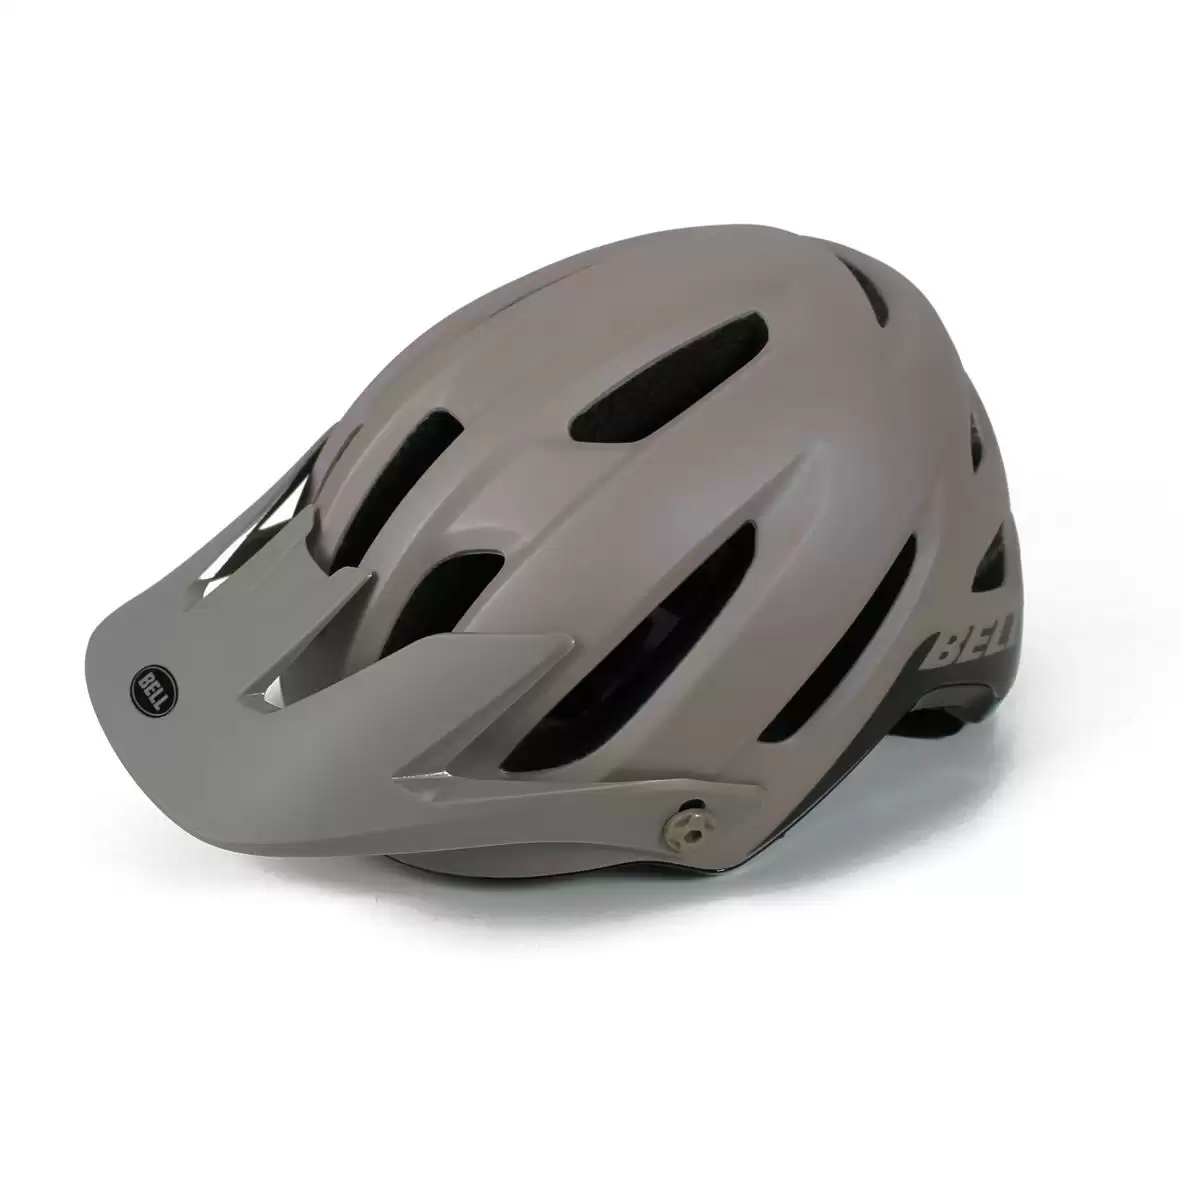 Casco 4FORTY MIPS Arena talla S (52-56cm) - image